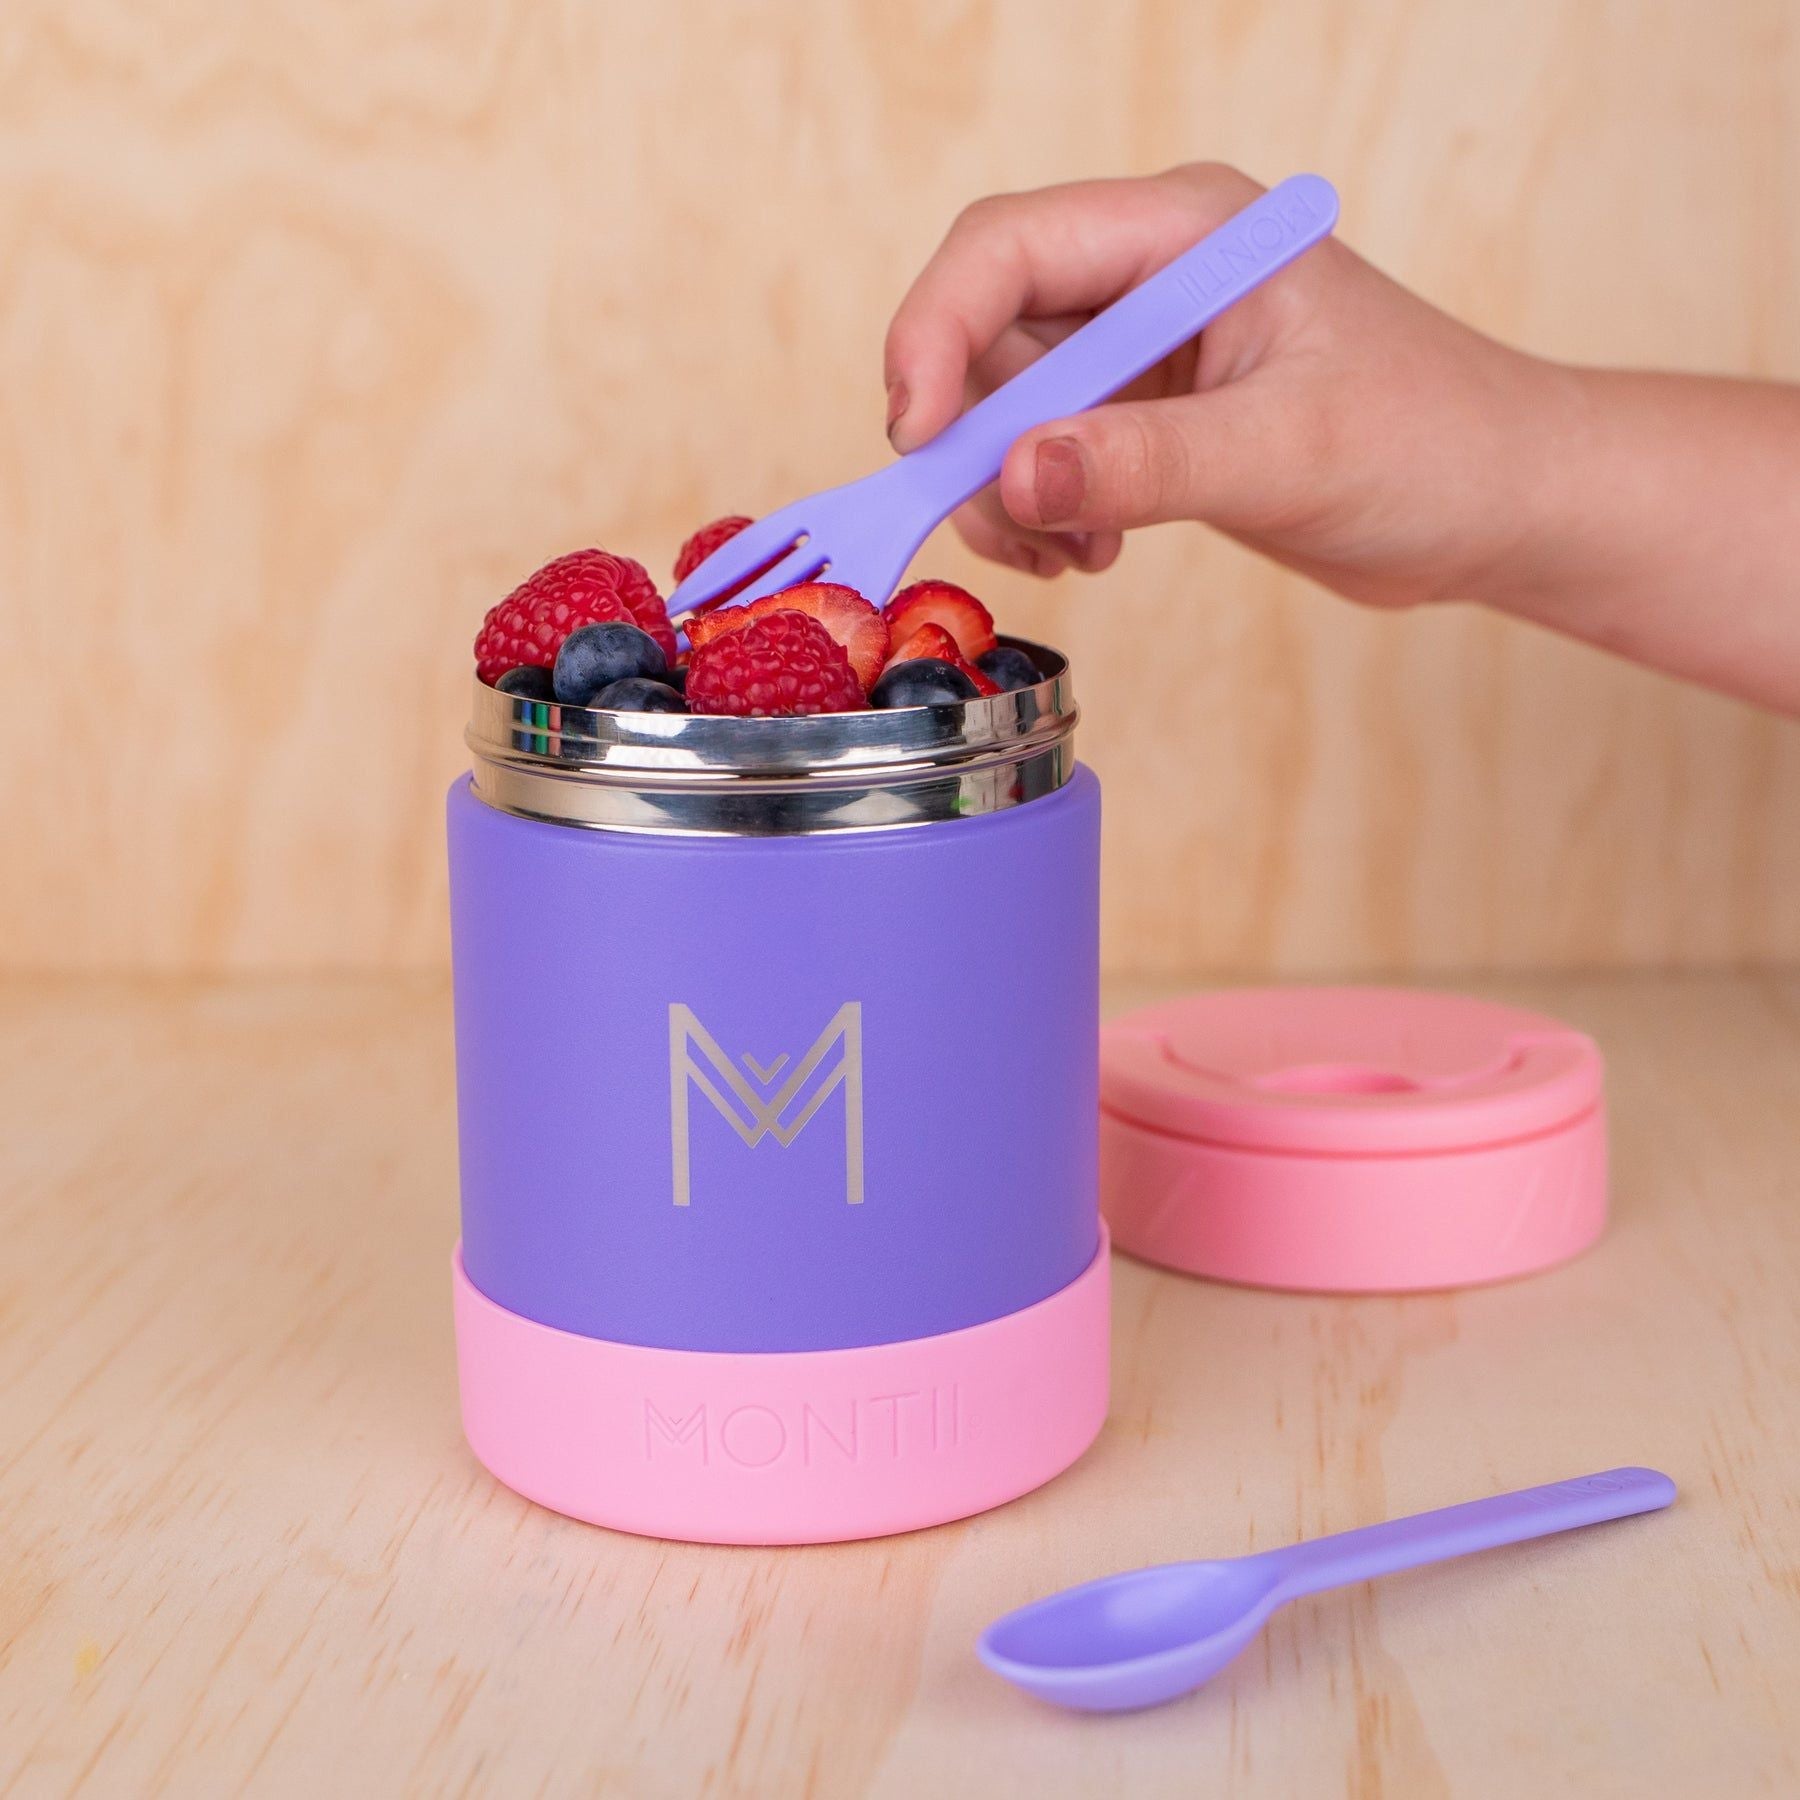 Montii NZ Cutlery Set for lunchboxes